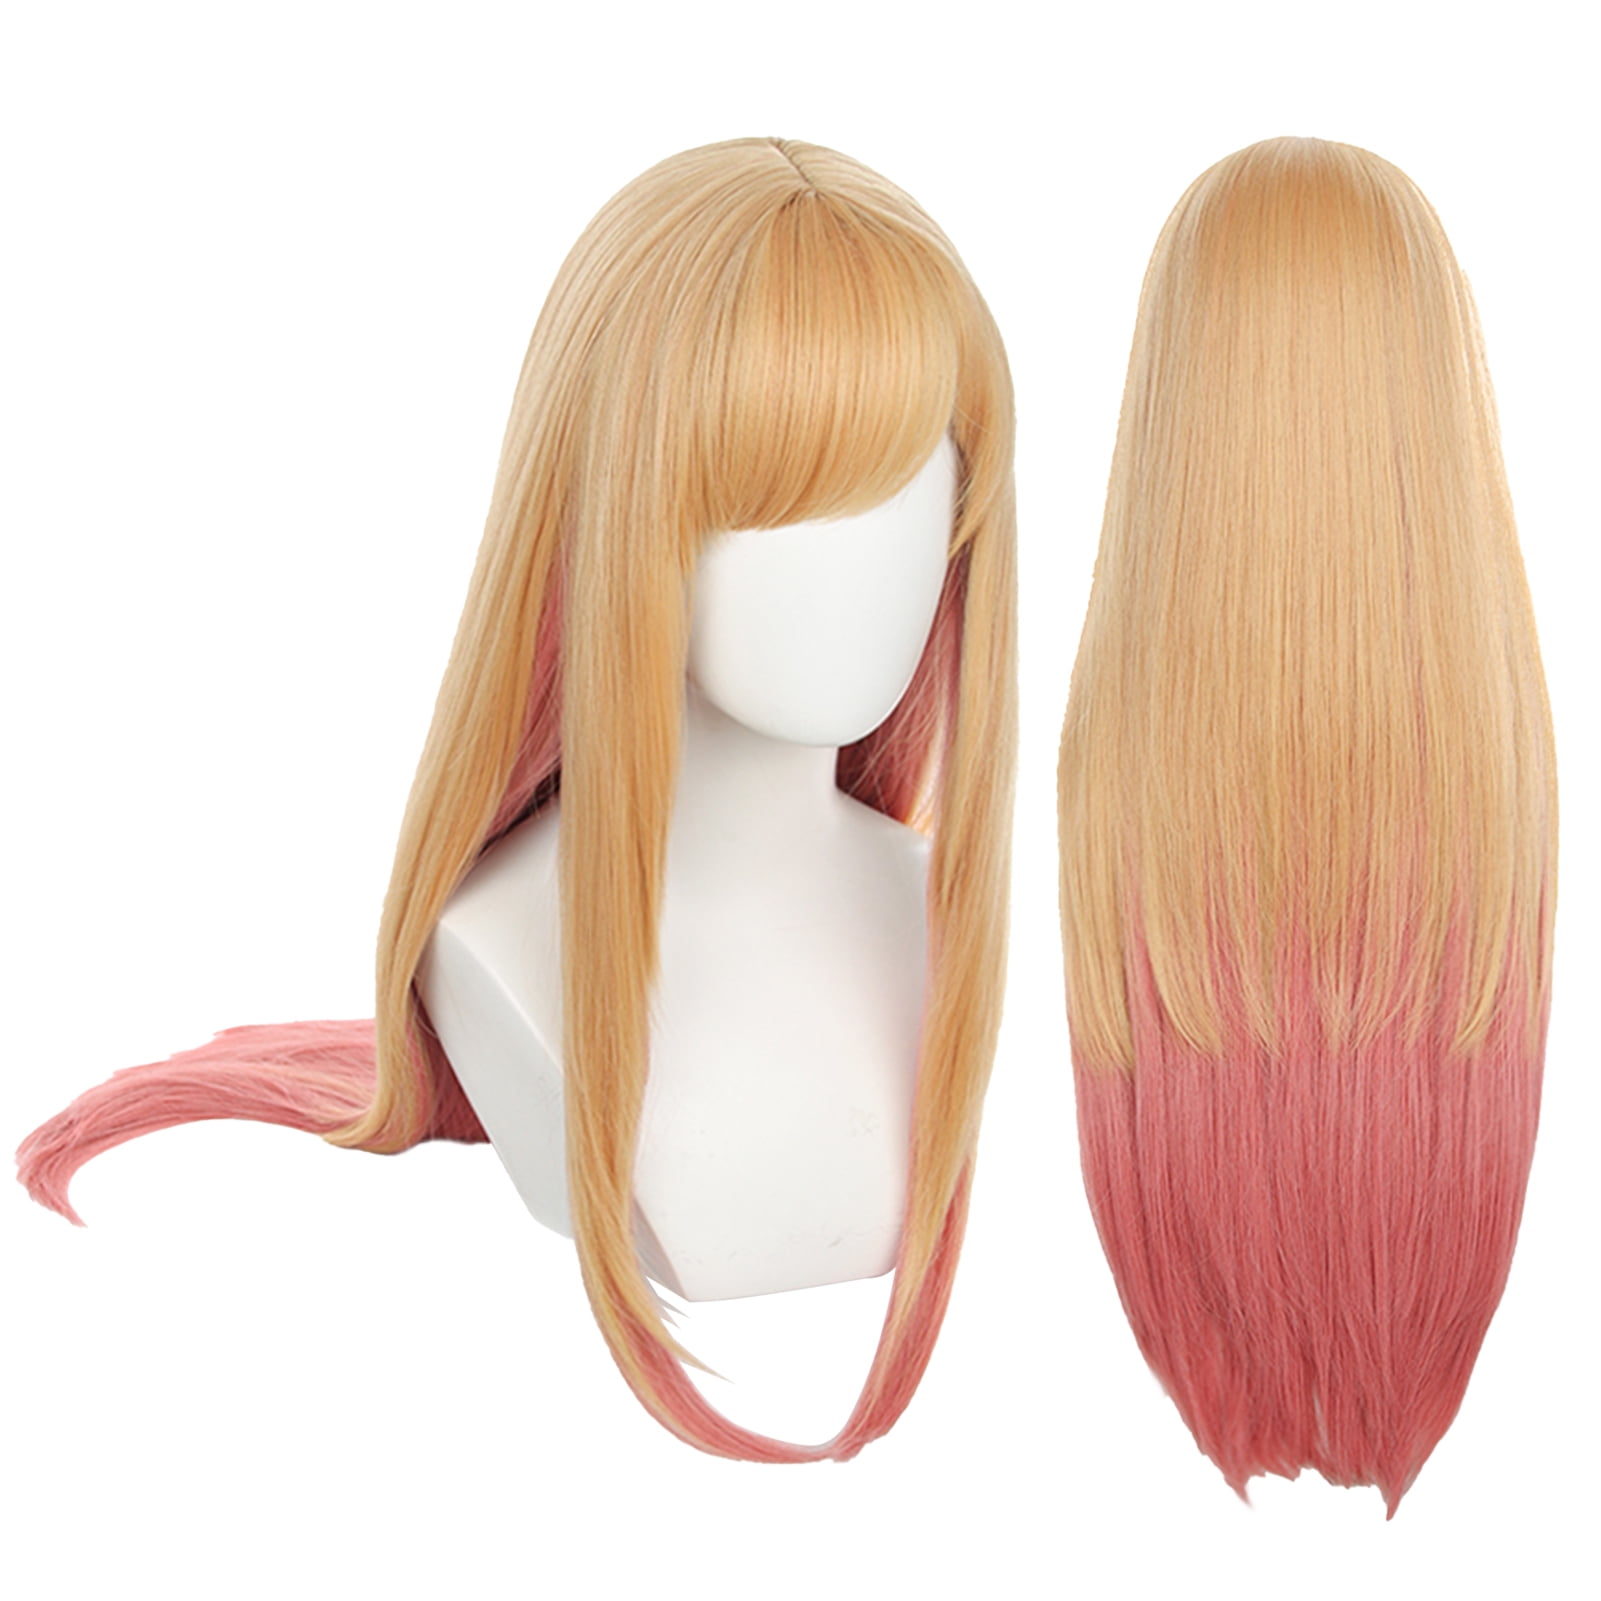 Jinnhelun Long Blonde Pink Wigs with Bangs Marin Kitagawa Cosplay Long  Straight Hair Wig for Girls Women Anime Halloween Party Costume